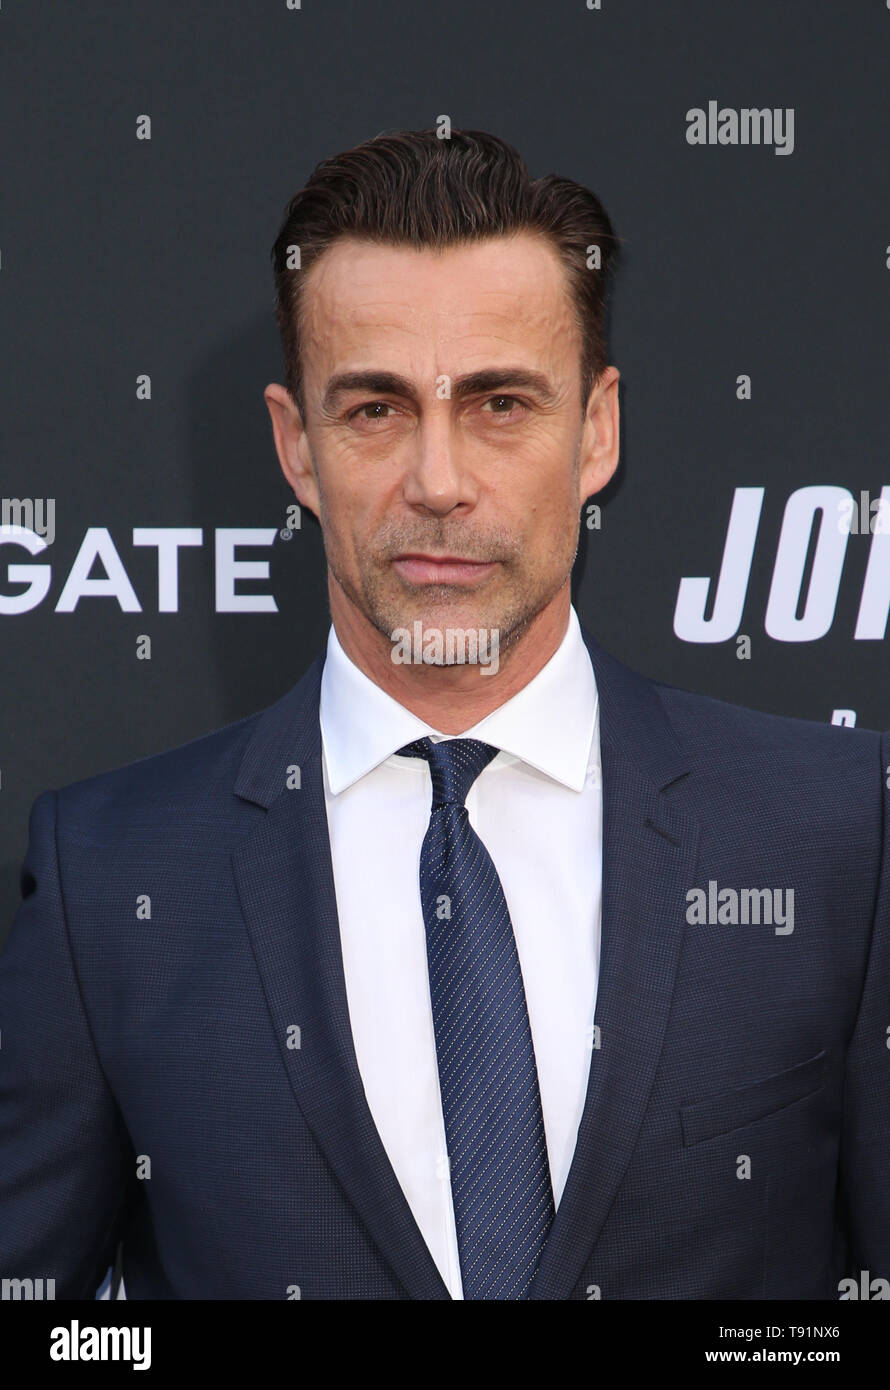 Hollywood, California, USA. 15th May, 2019. Daniel Bernhardt, attends the special screening of Lionsgate's 'John Wick: Chapter 3 - Parabellum' at TCL Chinese Theatre on May 15, 2019 in Hollywood, California. Credit: Faye Sadou/Media Punch/Alamy Live News Stock Photo